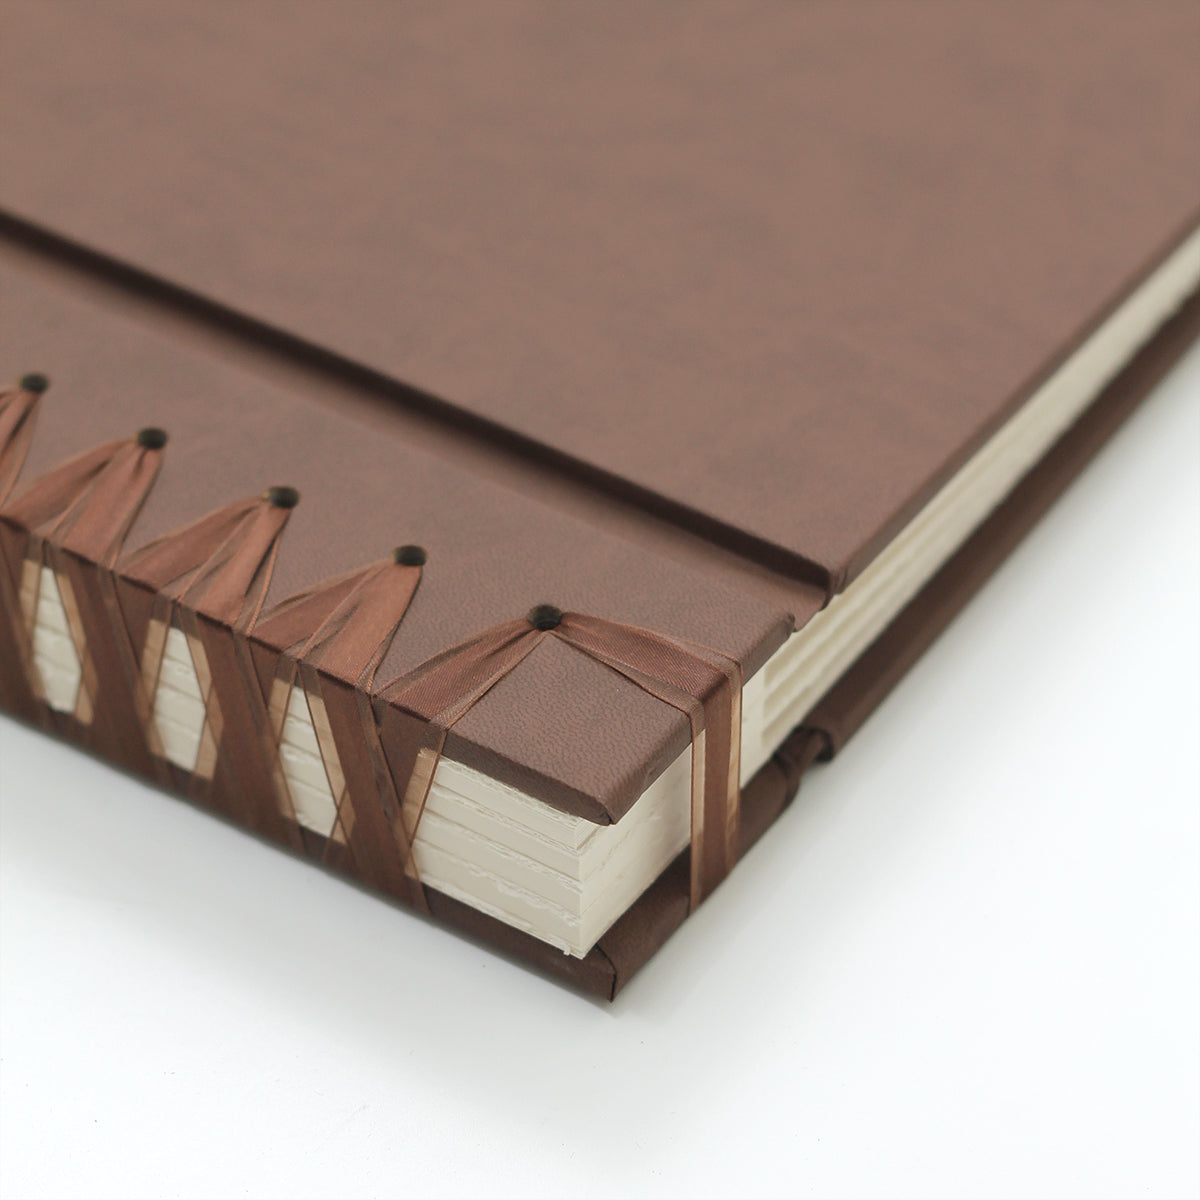 Large 10 x 15 Paper Page Album | Cover: Mocha Vegan Leather | Available Personalized